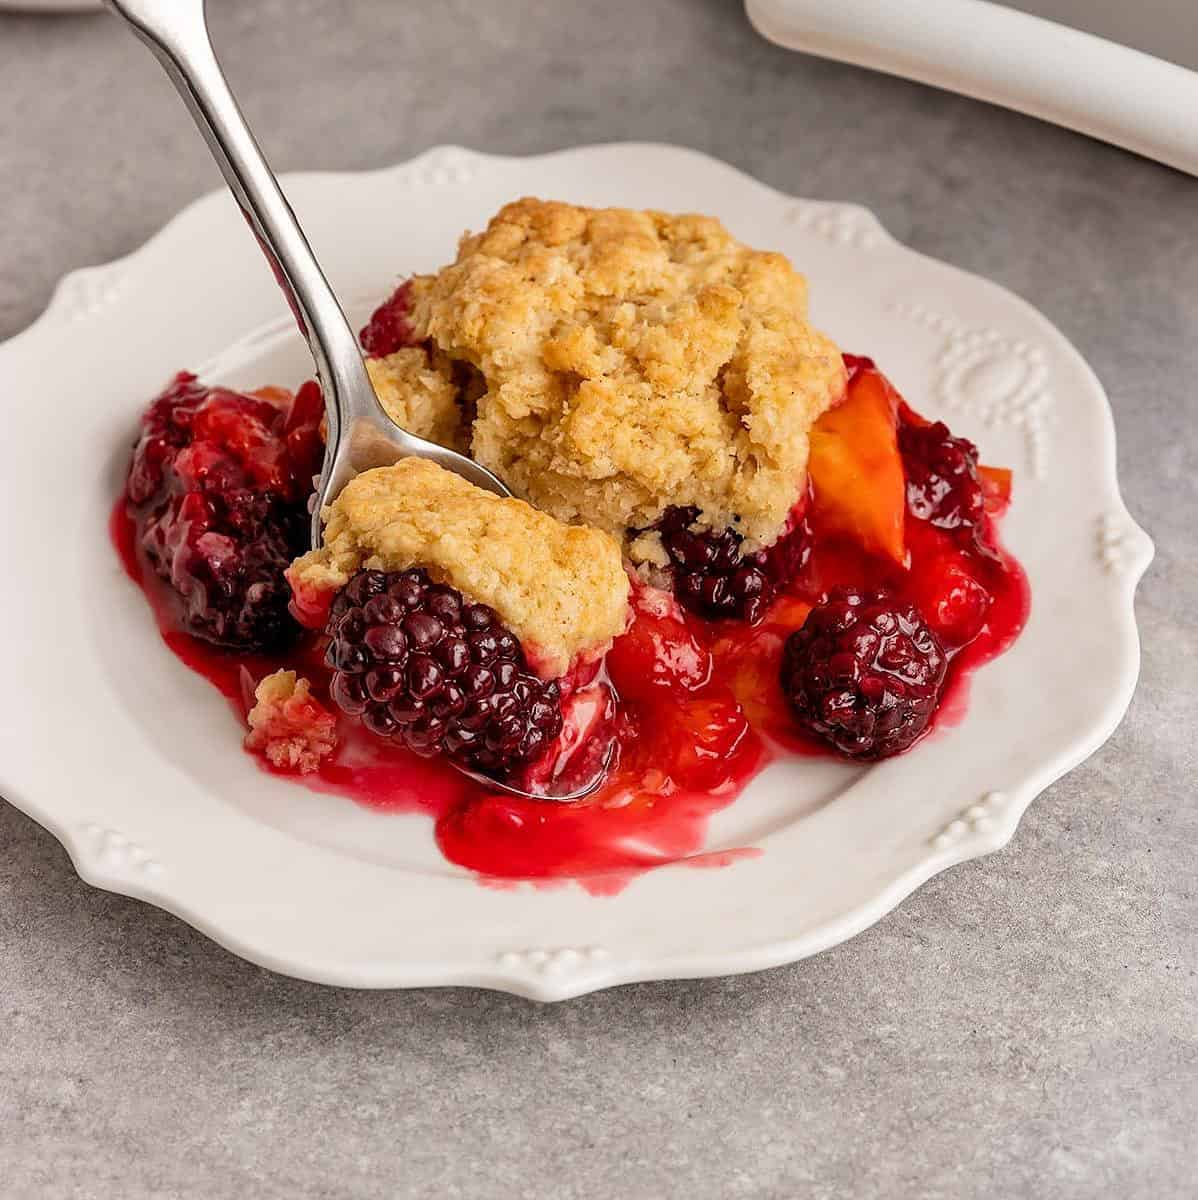  Get ready to enter a world of deliciousness with this Vegan Bourbon Cobbler!